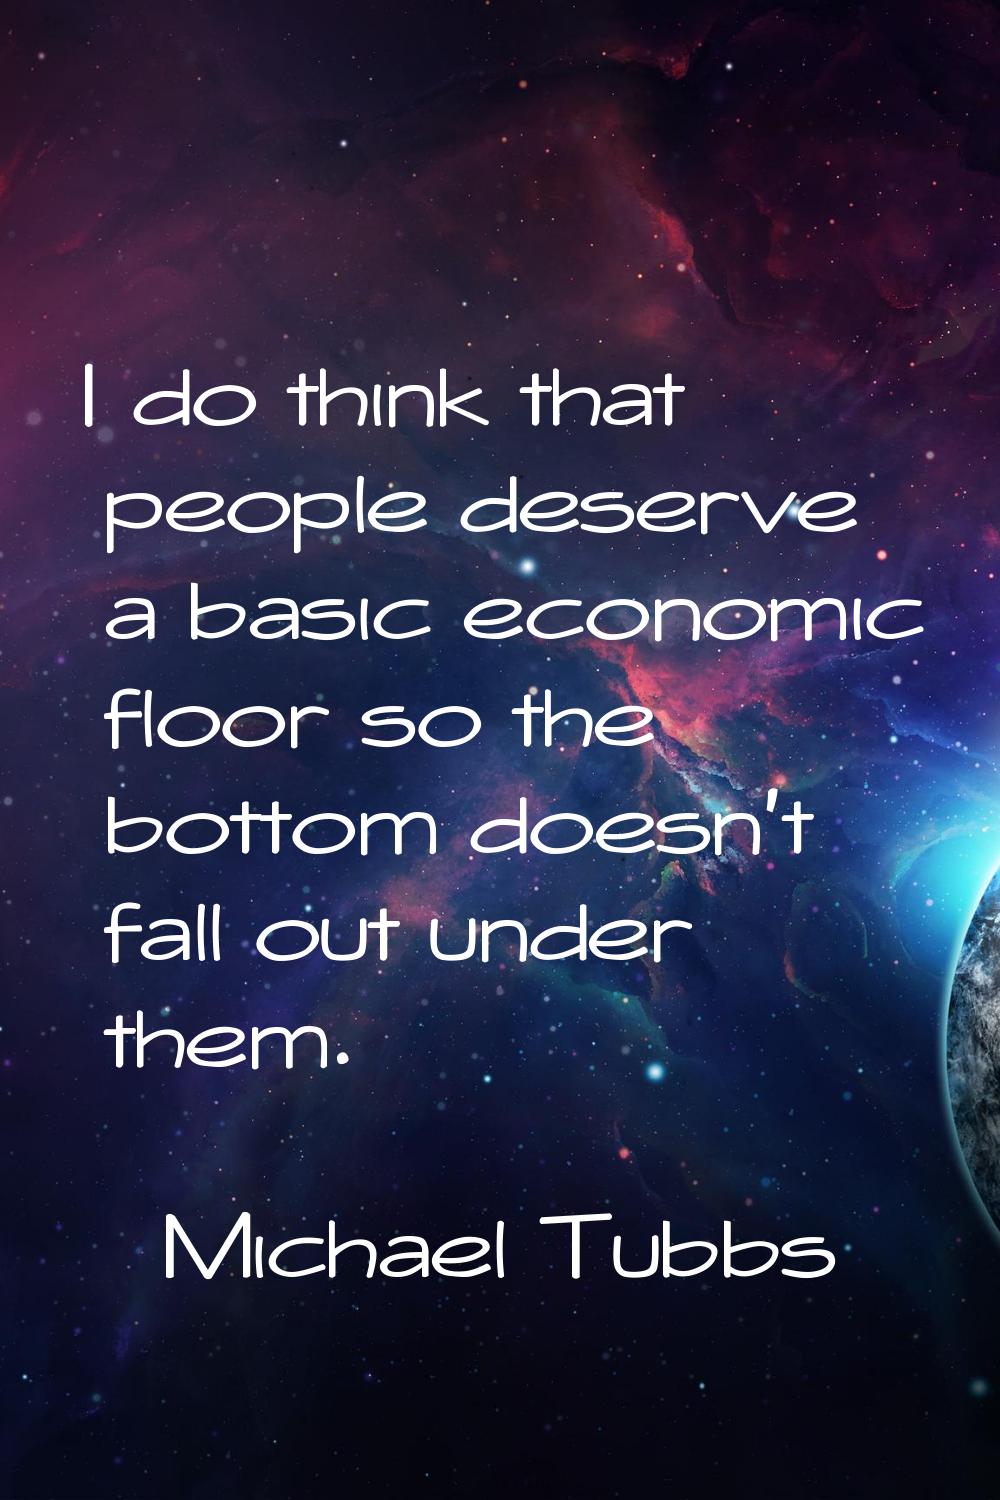 I do think that people deserve a basic economic floor so the bottom doesn't fall out under them.